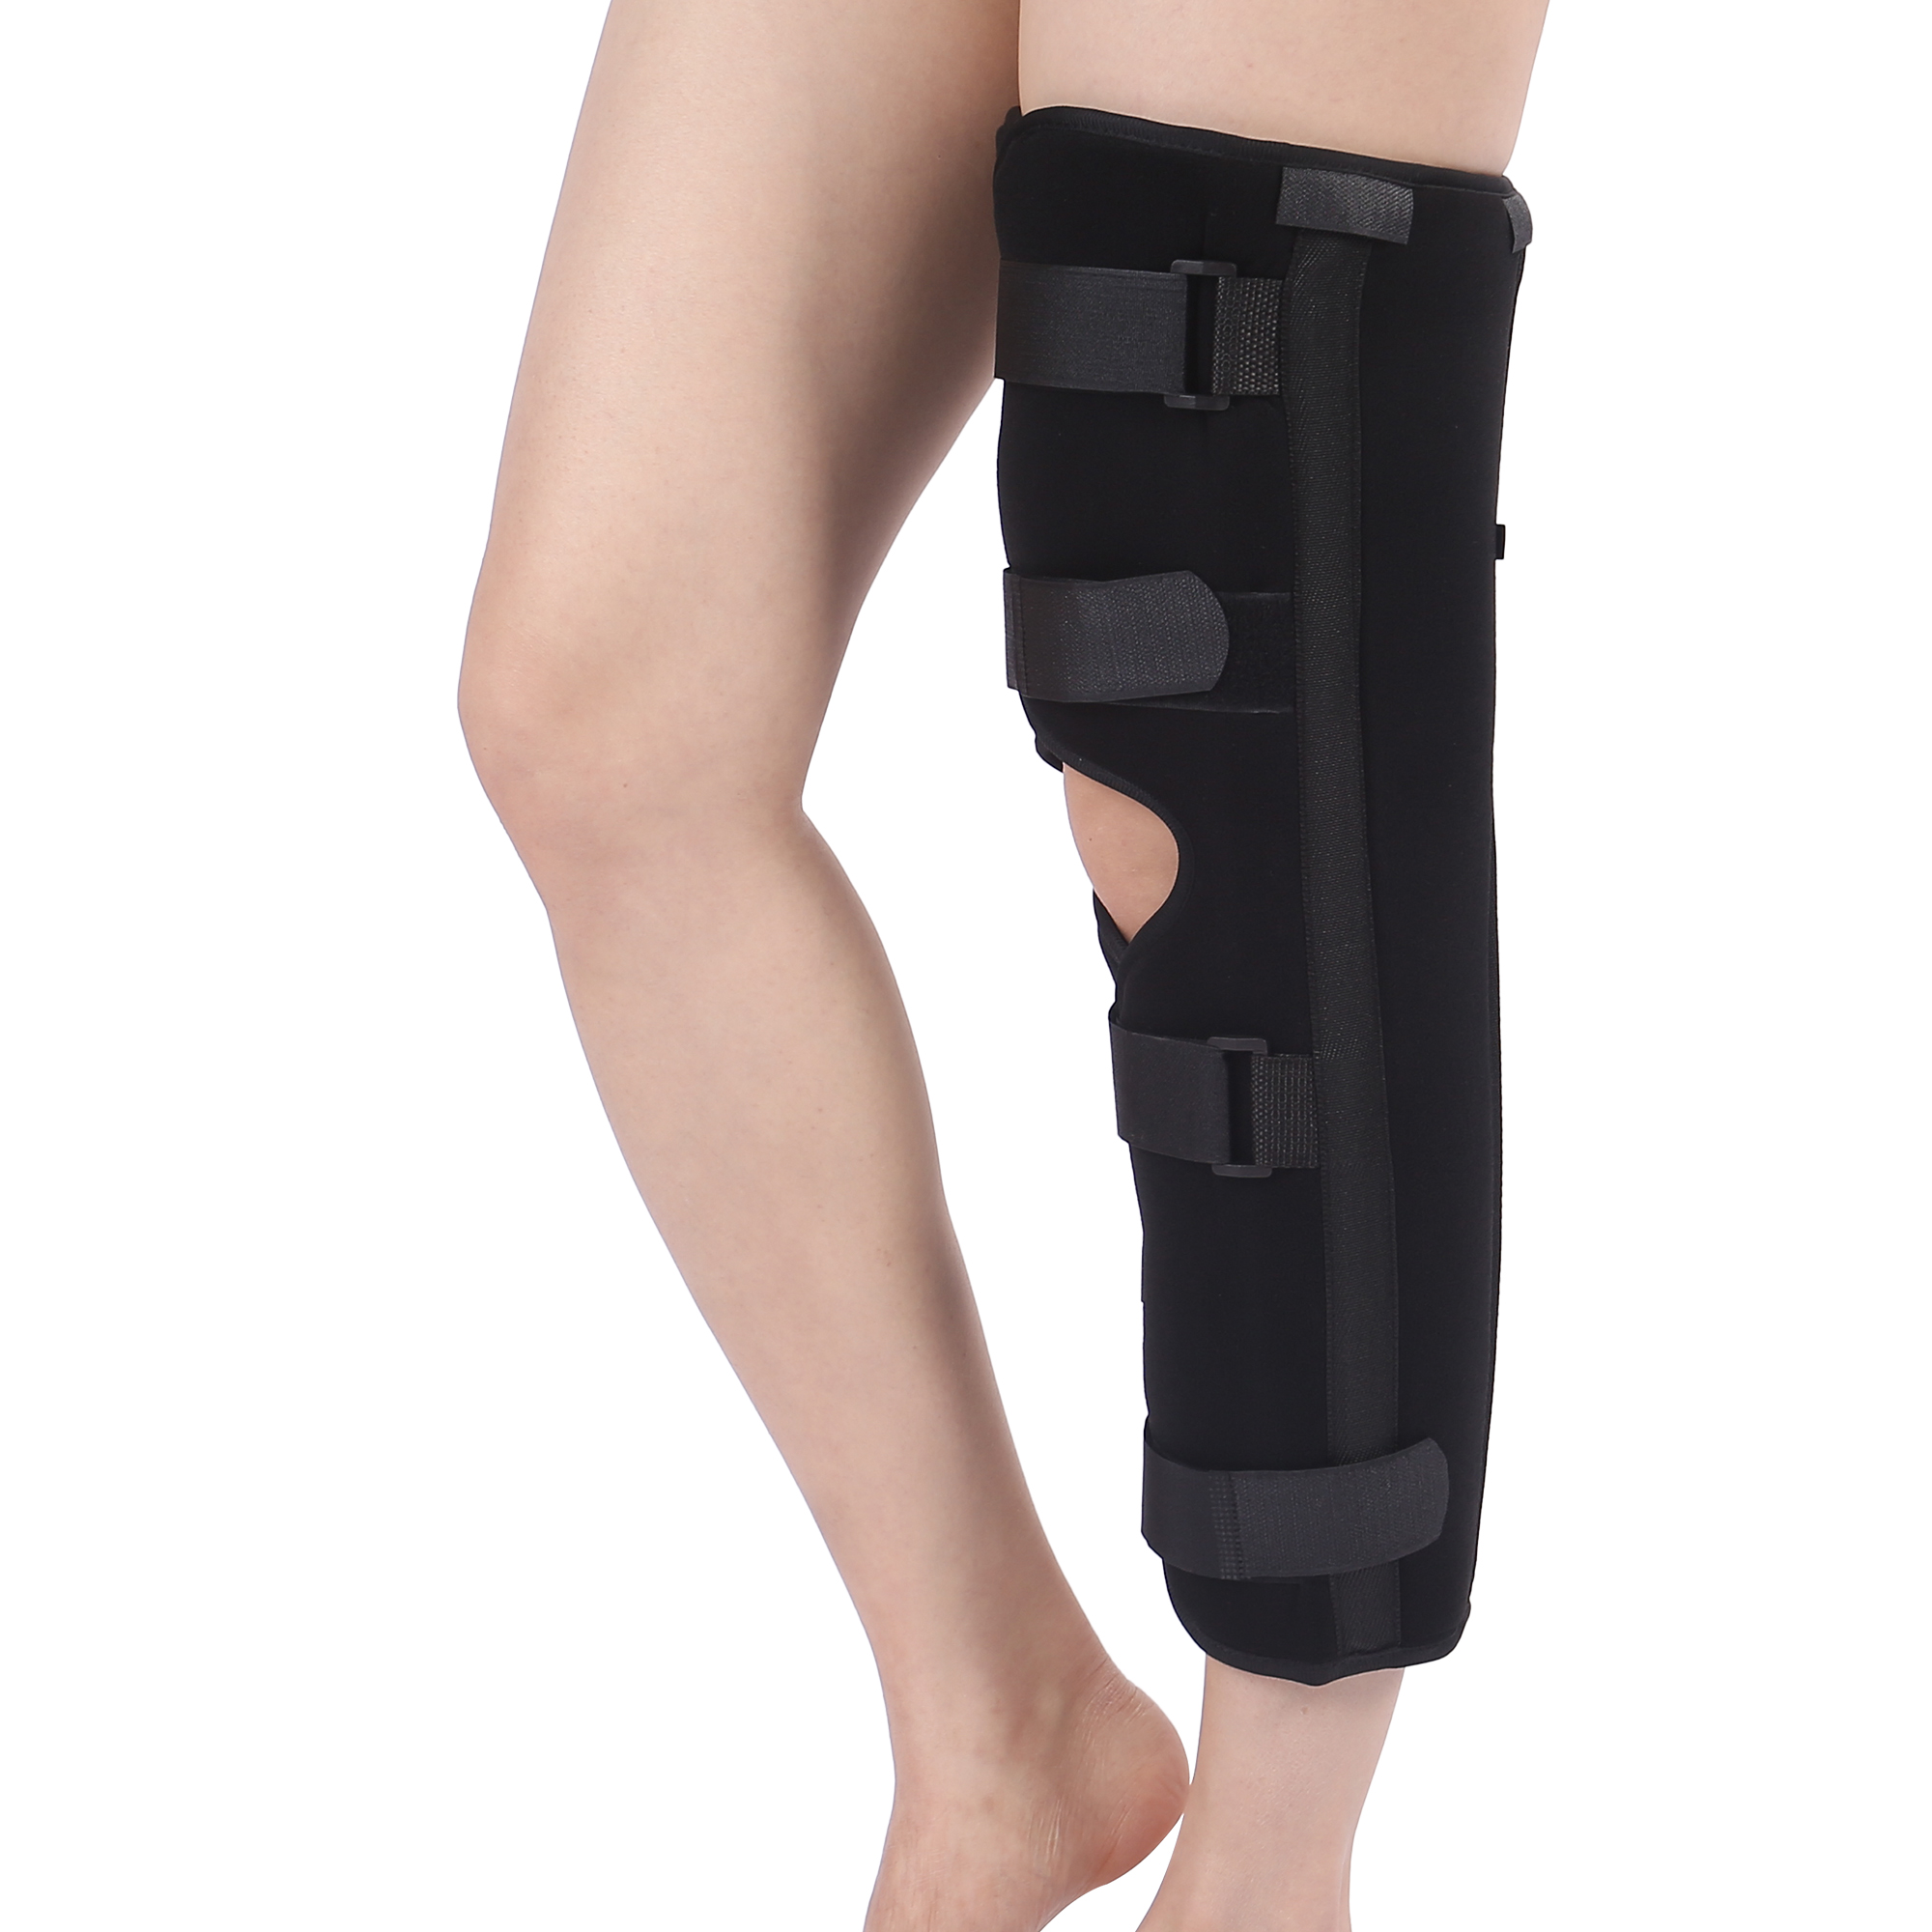 Knee support compression full front elbow sleeve leg support straightening support suspension stabilizer